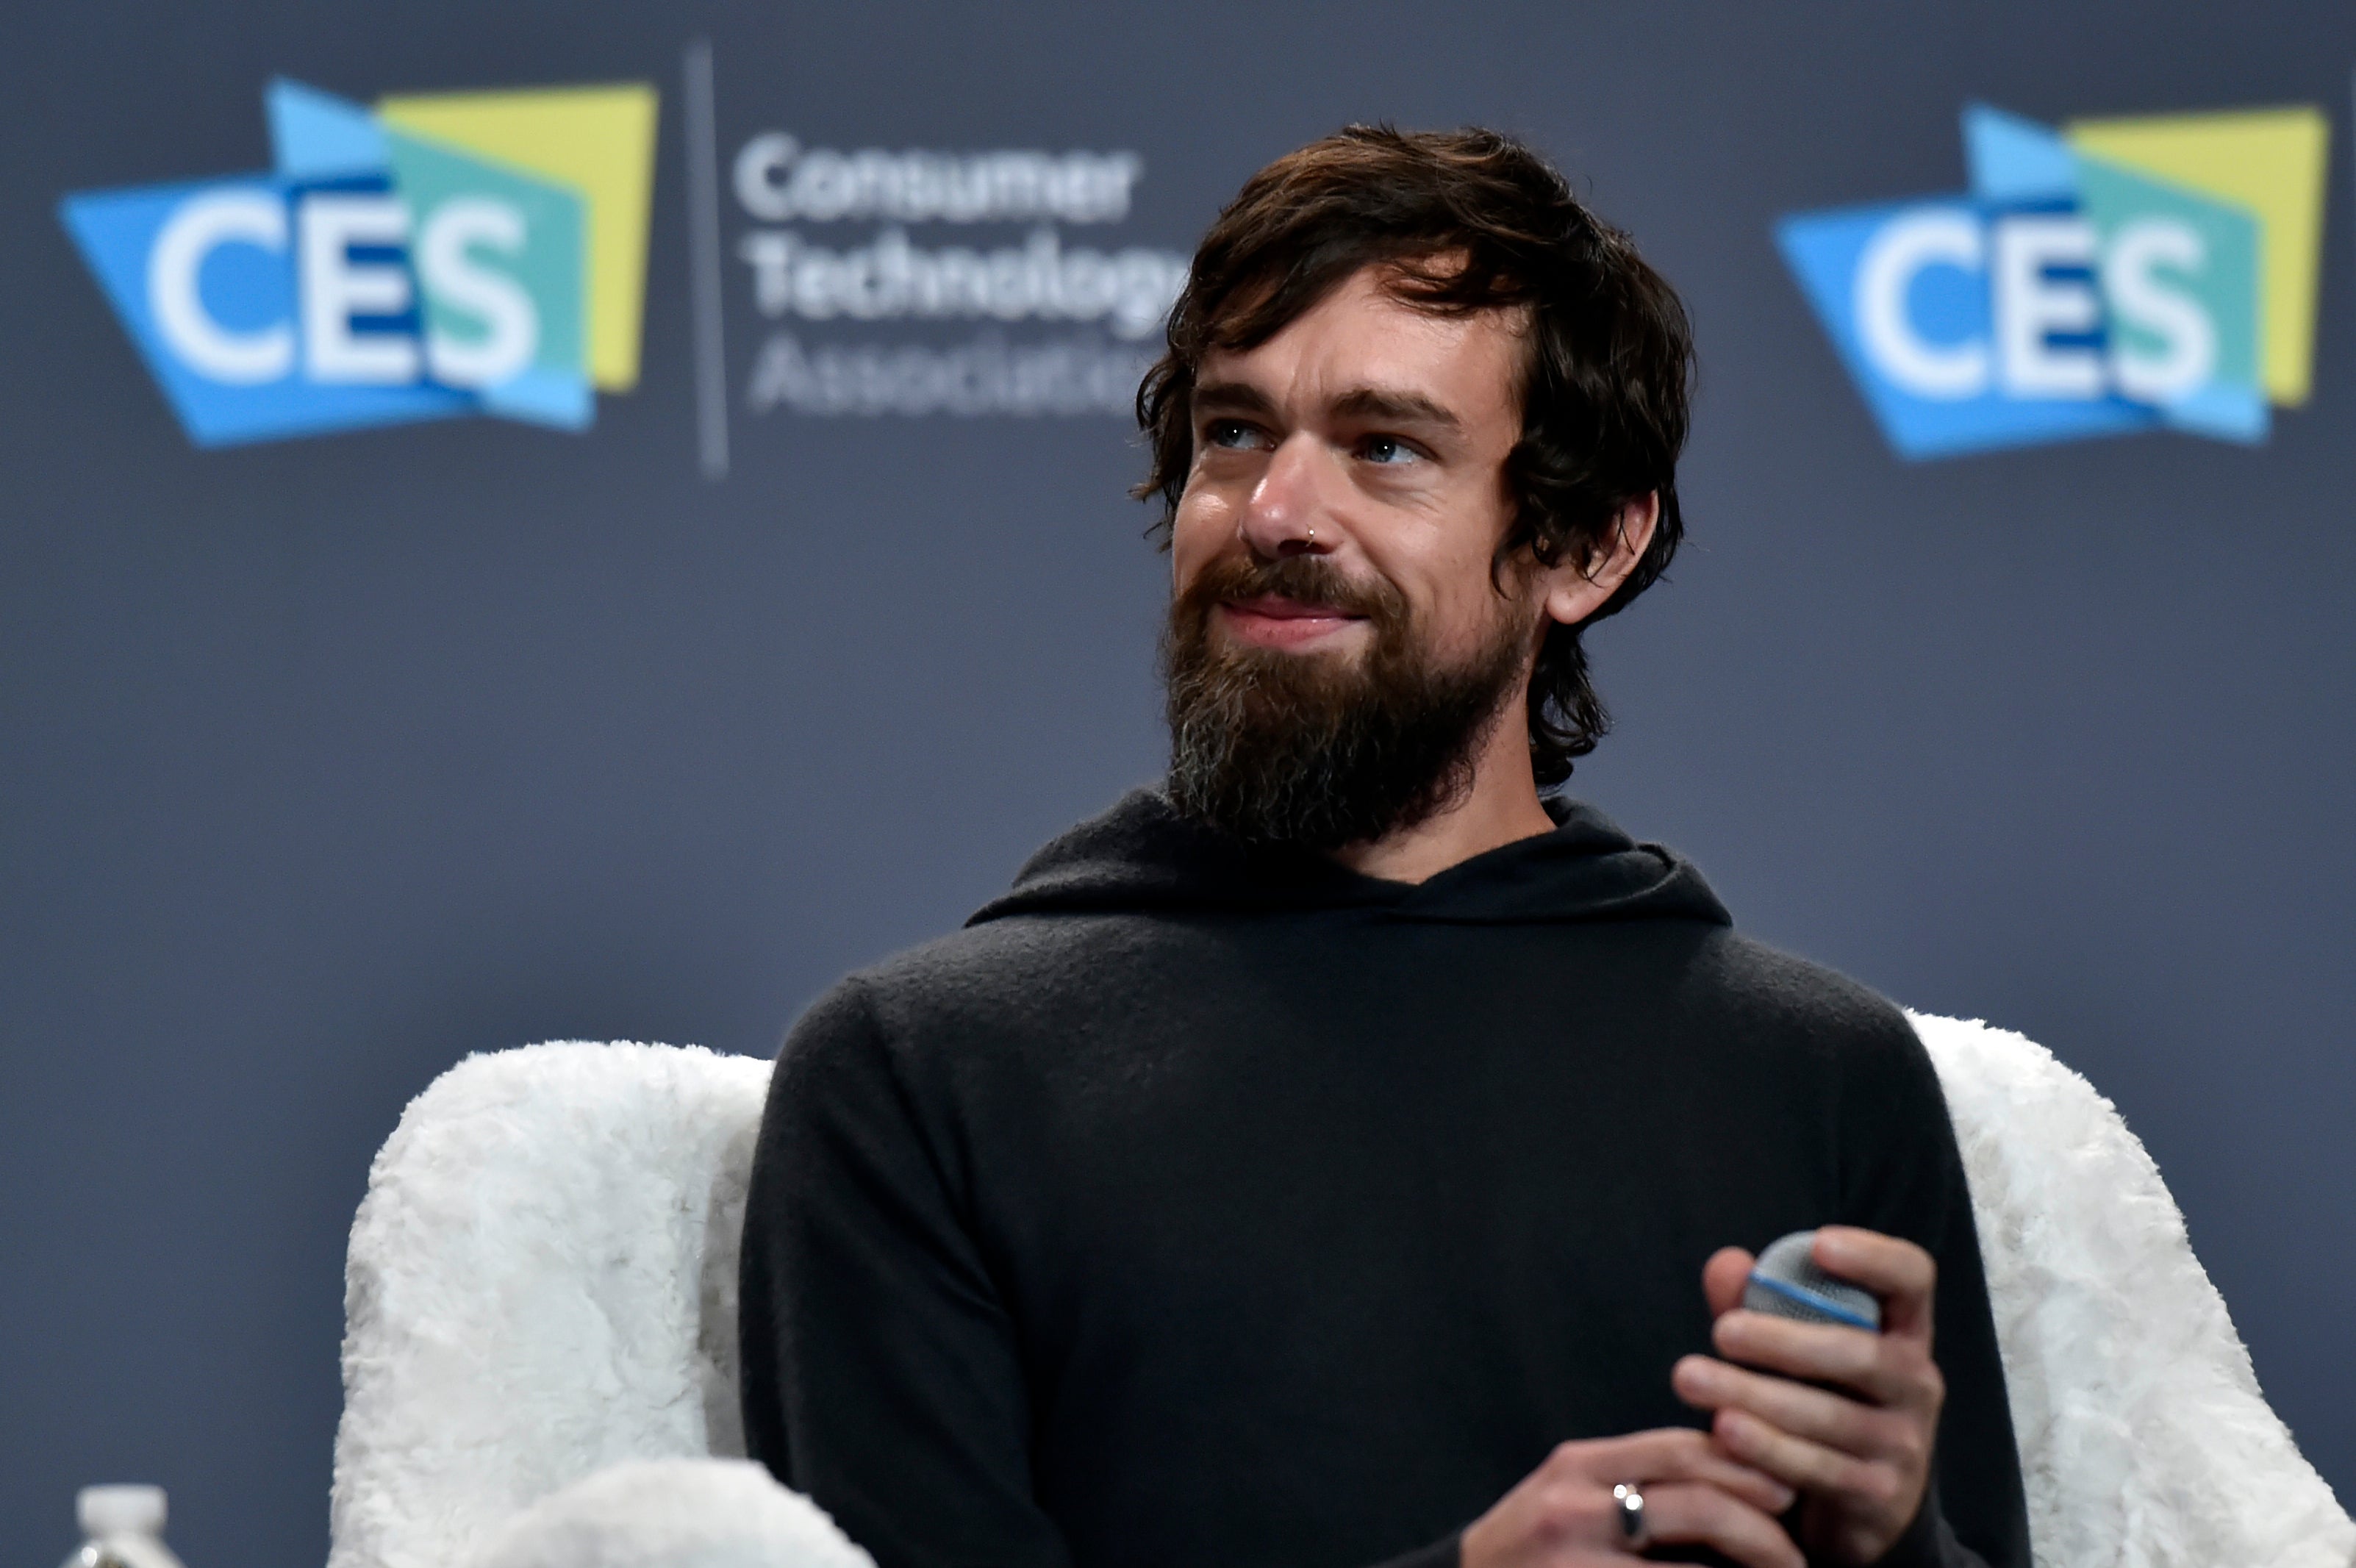 Jack Dorsey auctioned off his very first tweet for Give Directly’s Africa Response charity